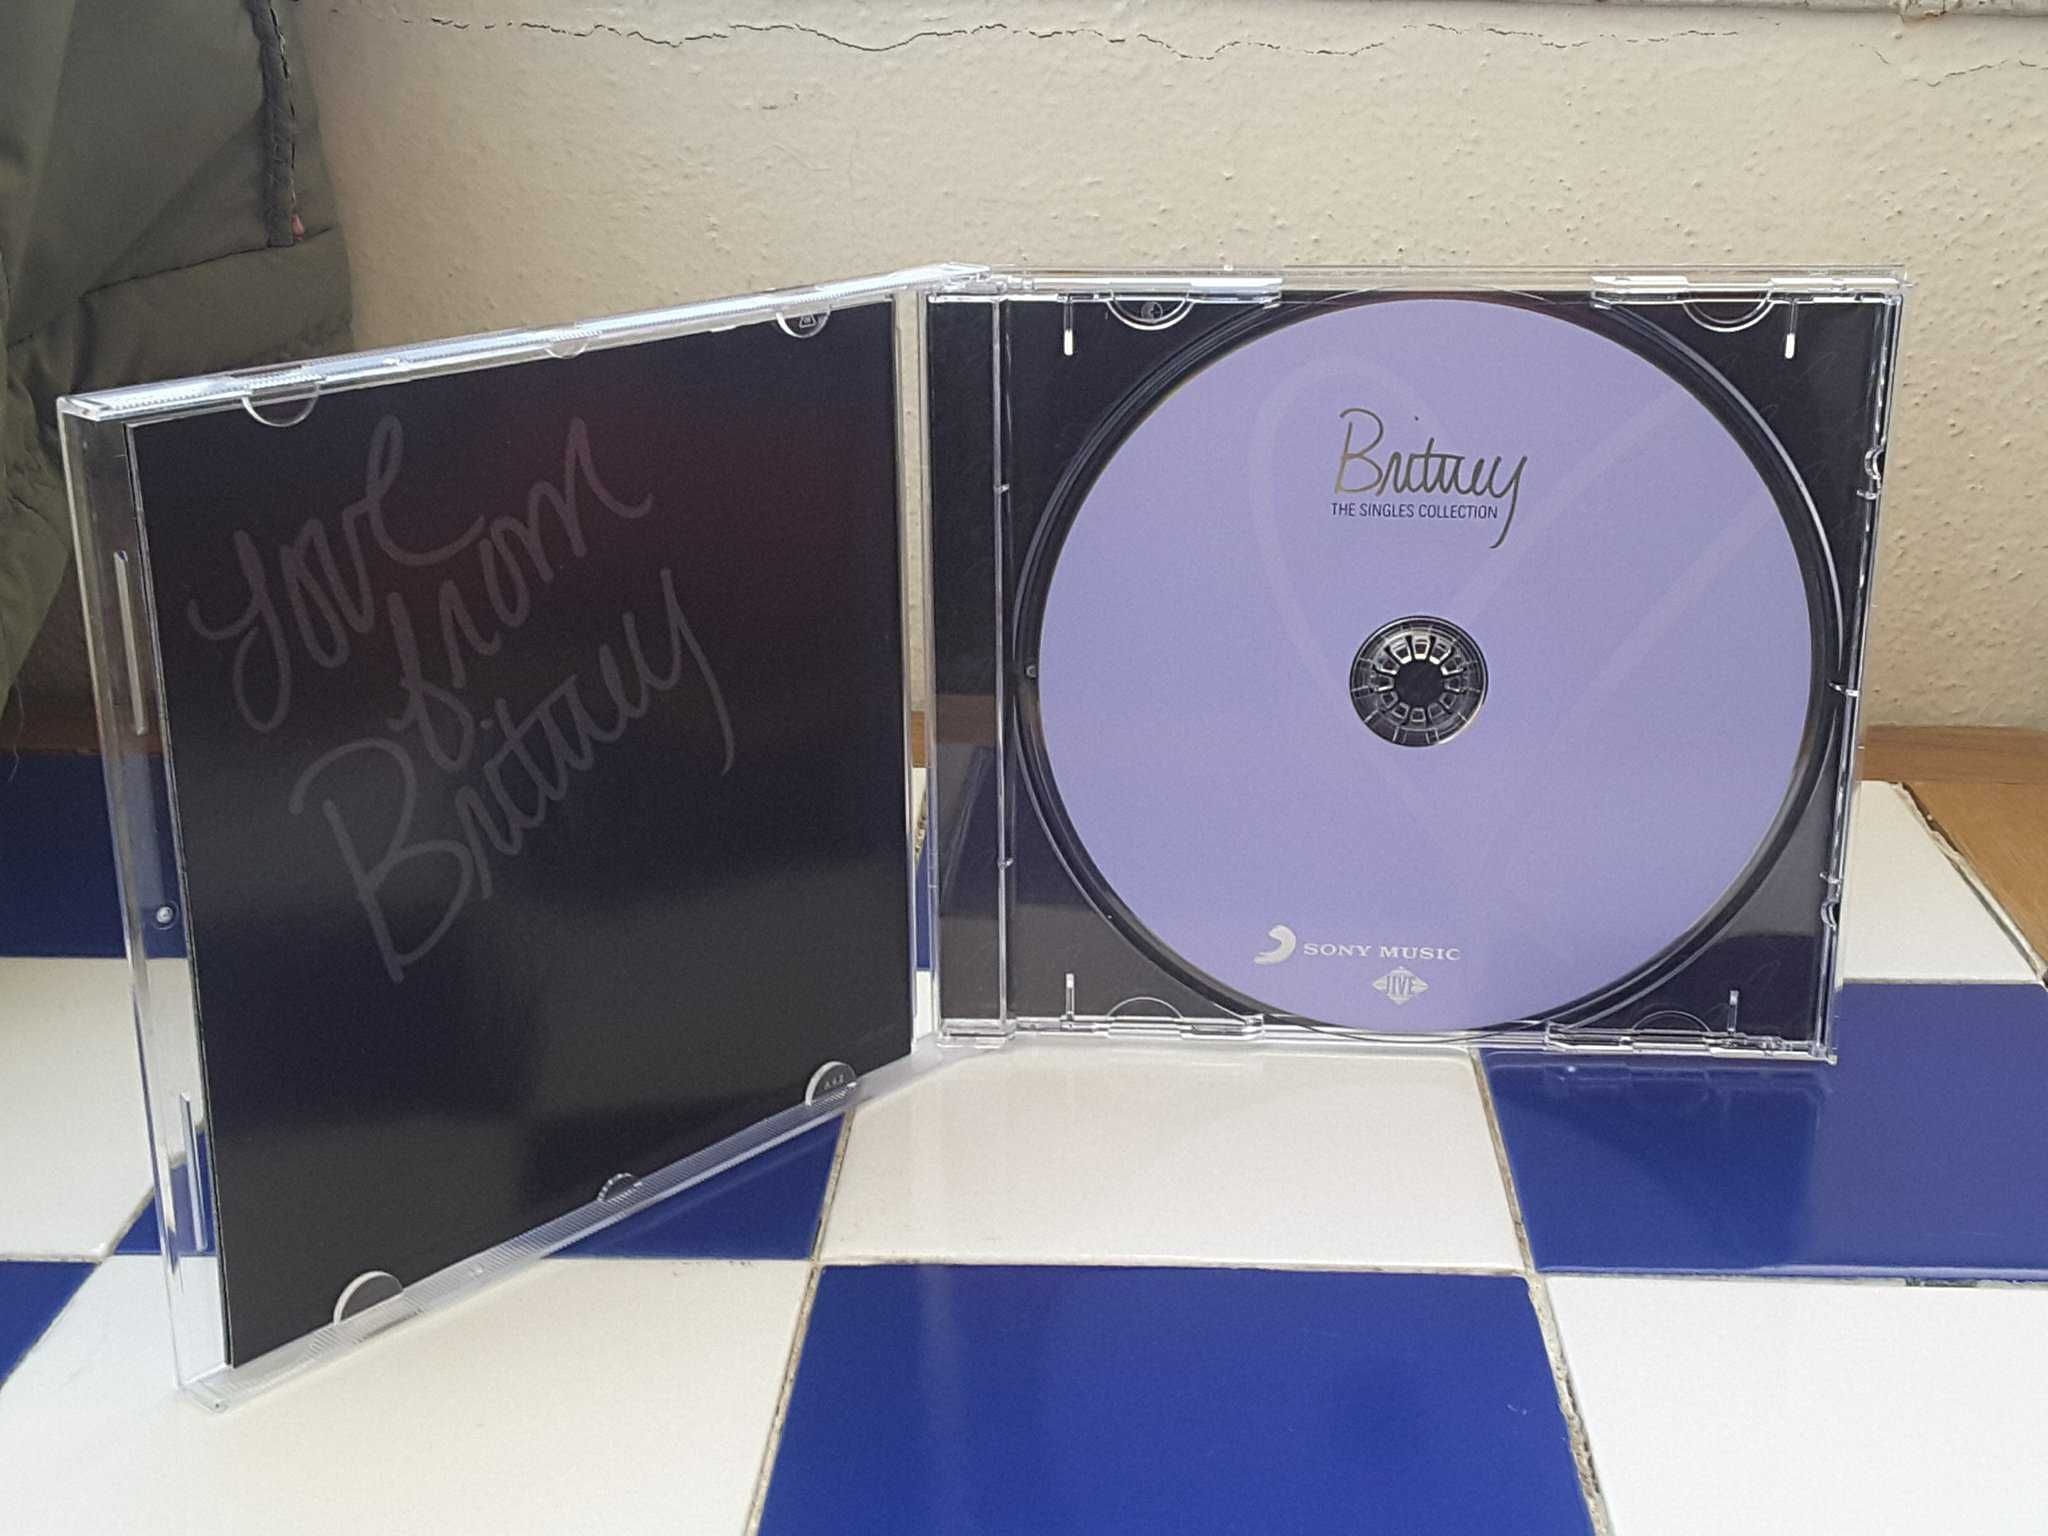 CD - "Britney: The Singles Collection"